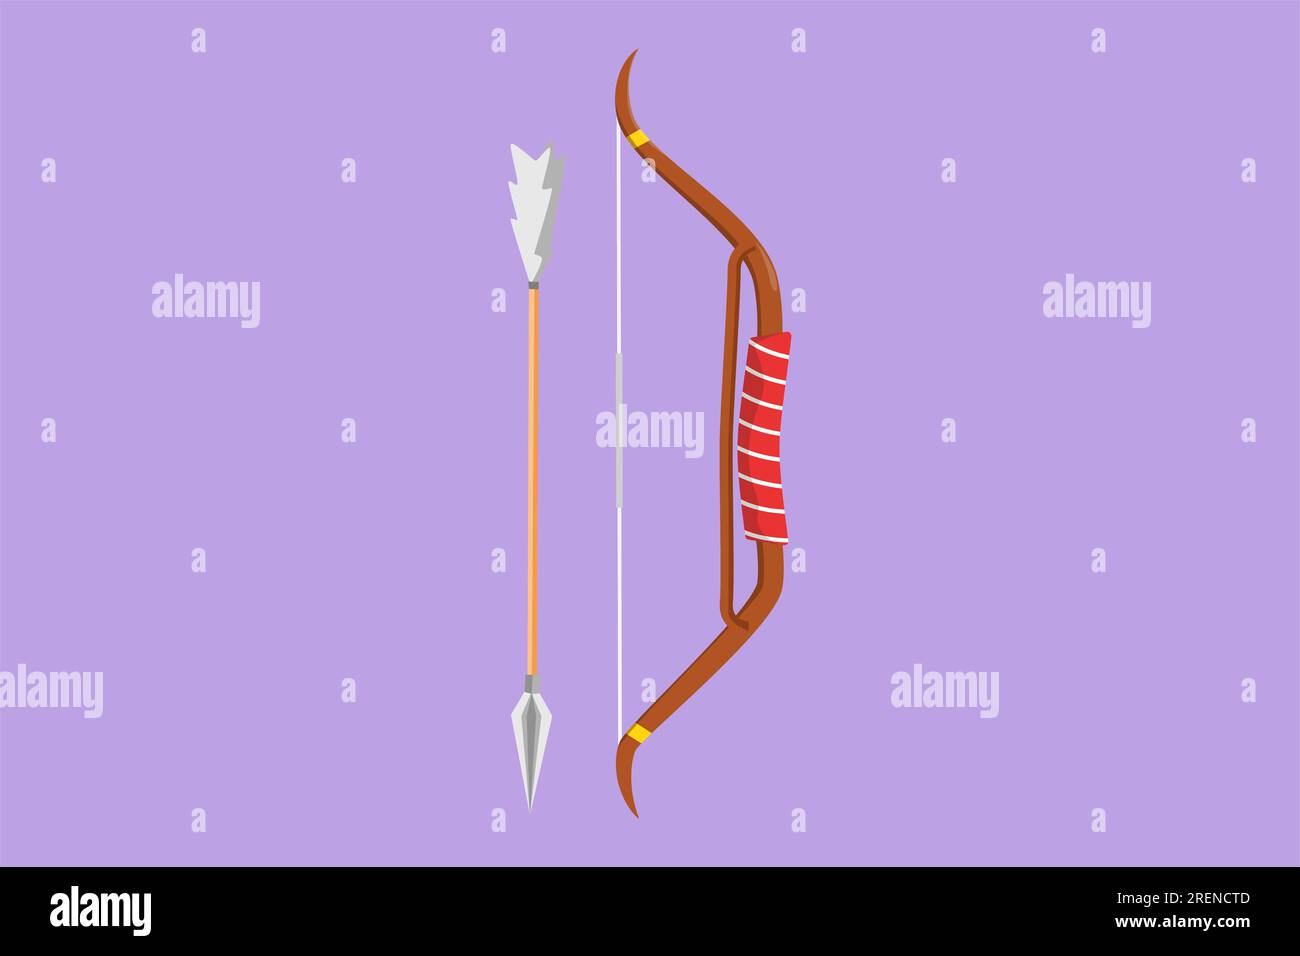 Bow And Arrow White Transparent, Cartoon Bow Bow And Arrow Arms Pink  Longbow, Modern Bow, Kids Toys, Weapon PNG Image For Free Download